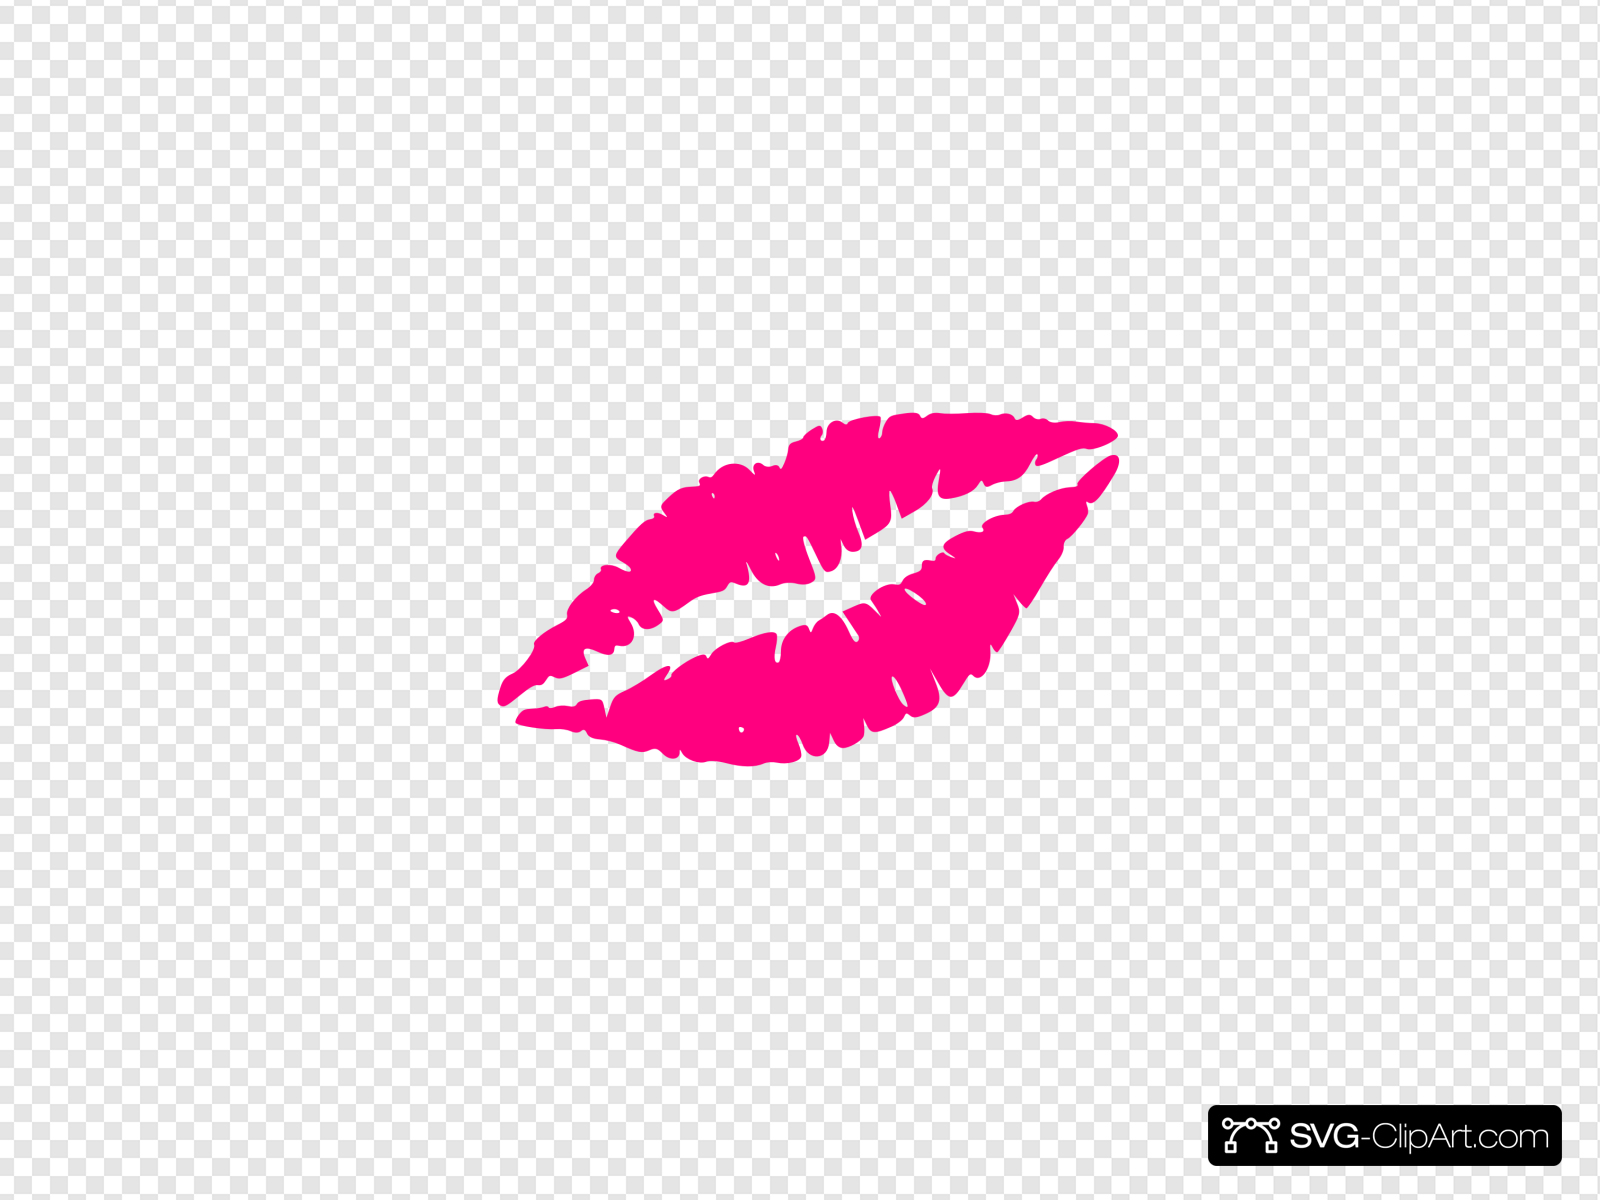 Pink Lips Clip art, Icon and SVG.